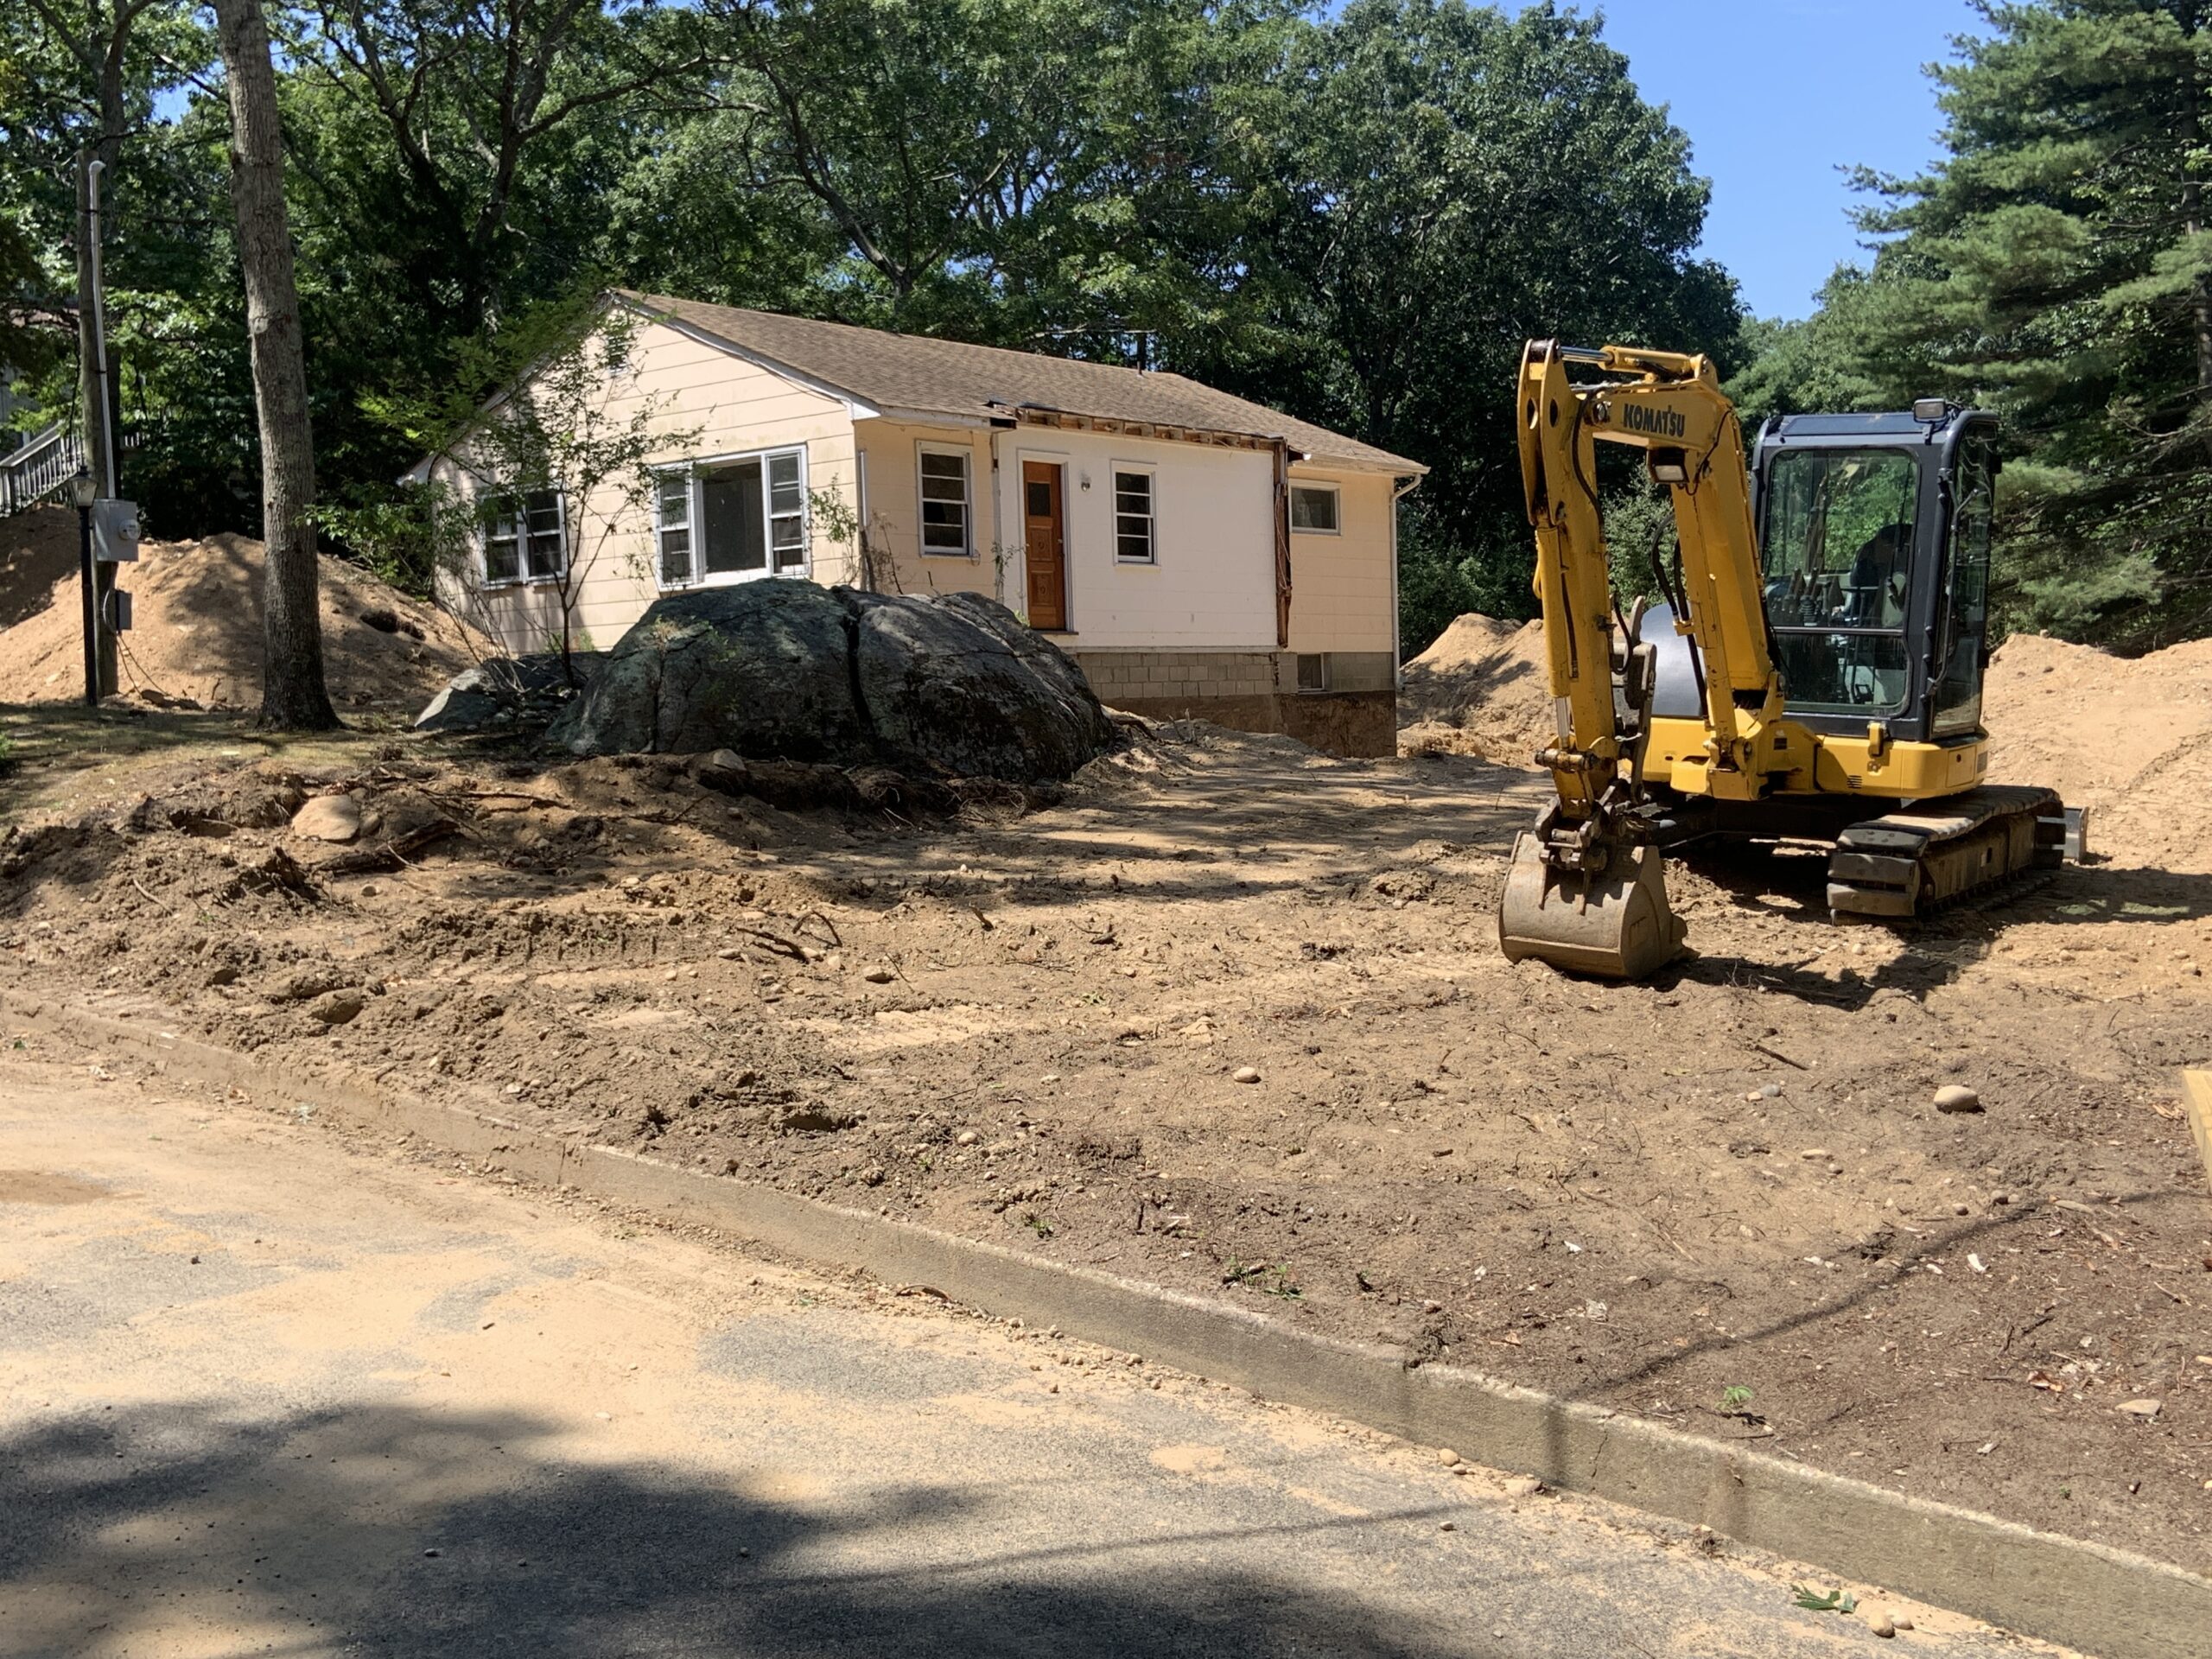 Although many modest houses remain in Azurest, many, like this one on Milton Avenue, are being renovated and expanded. STEPHEN J. KOTZ